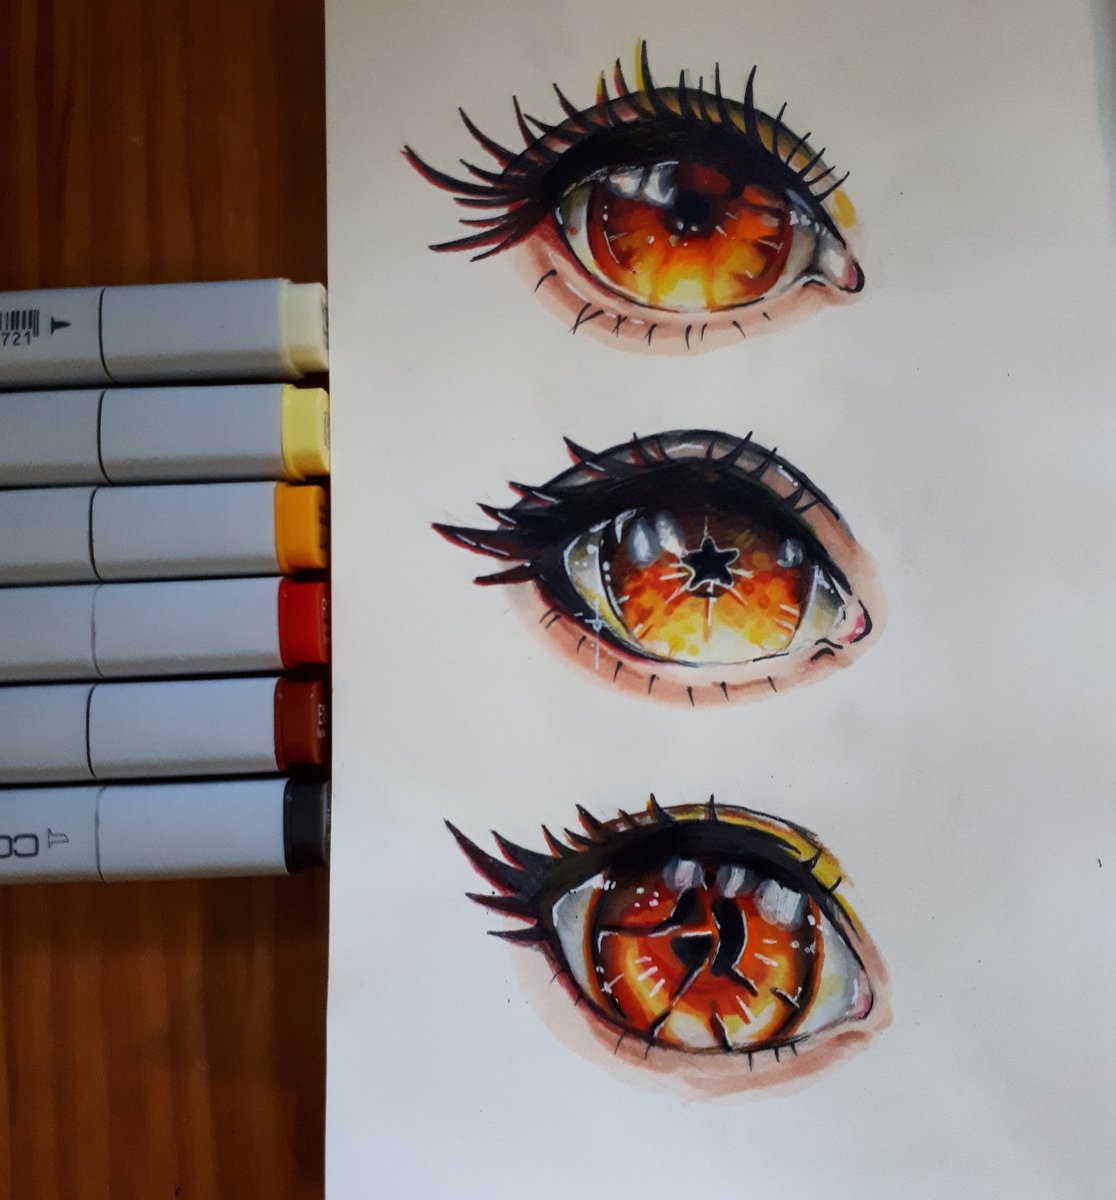 Here's another set of eyes! Working hard on the next video ~ should be out next month. 

#eyes #anime #animeeyes #manga #mangaart #animeart #fanart #artistsontwitter #ArtistOnTwitter #copic #copicart #copicartwork #markers #markerart #copicwithus #sketchbook #draw #drawing